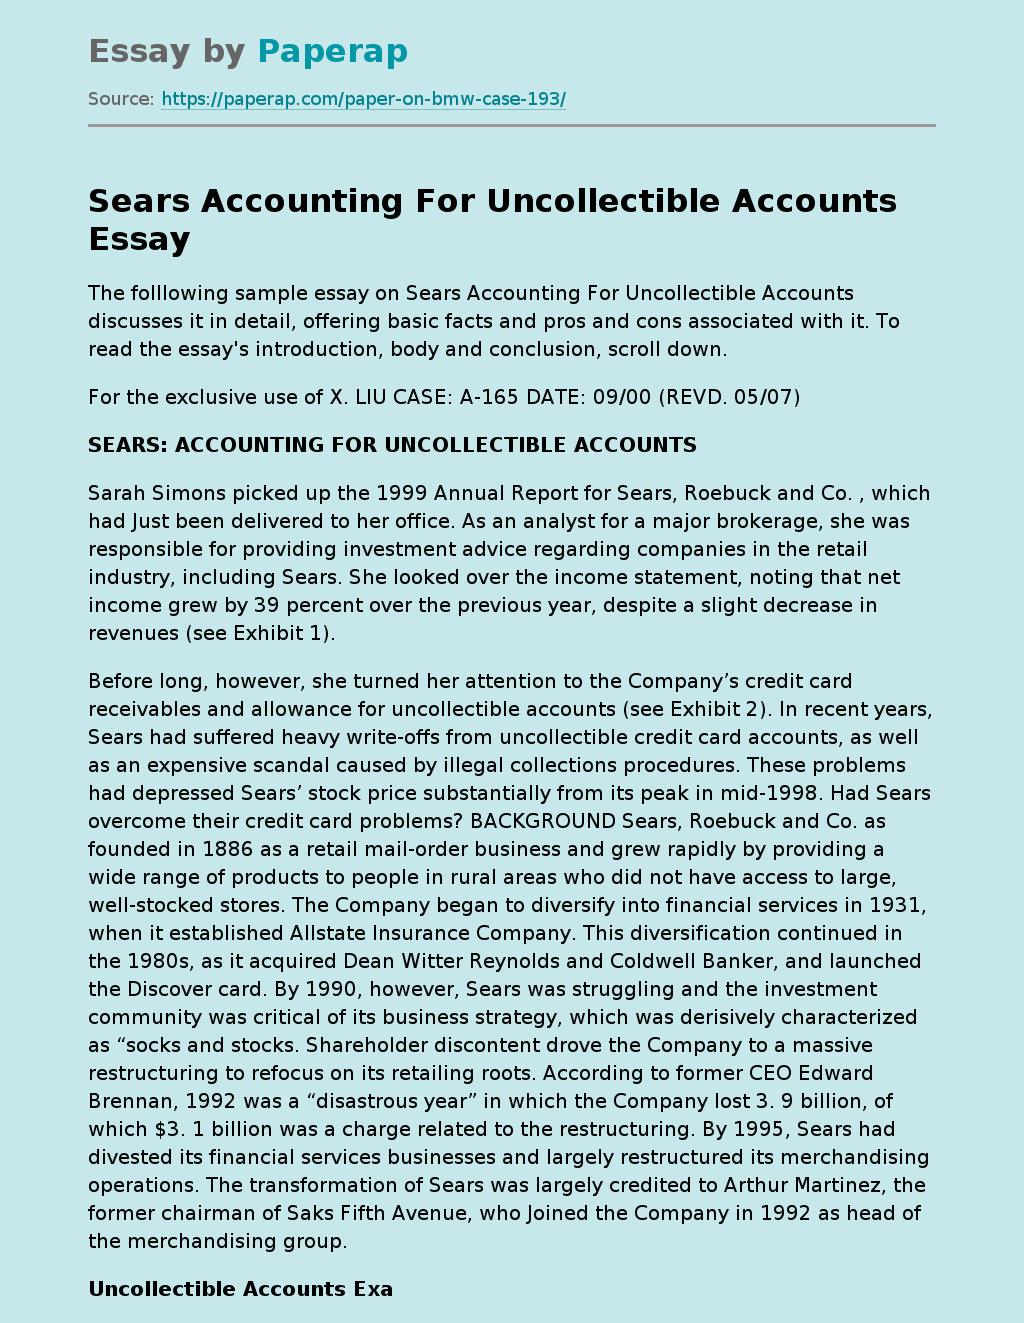 Sears Accounting For Uncollectible Accounts